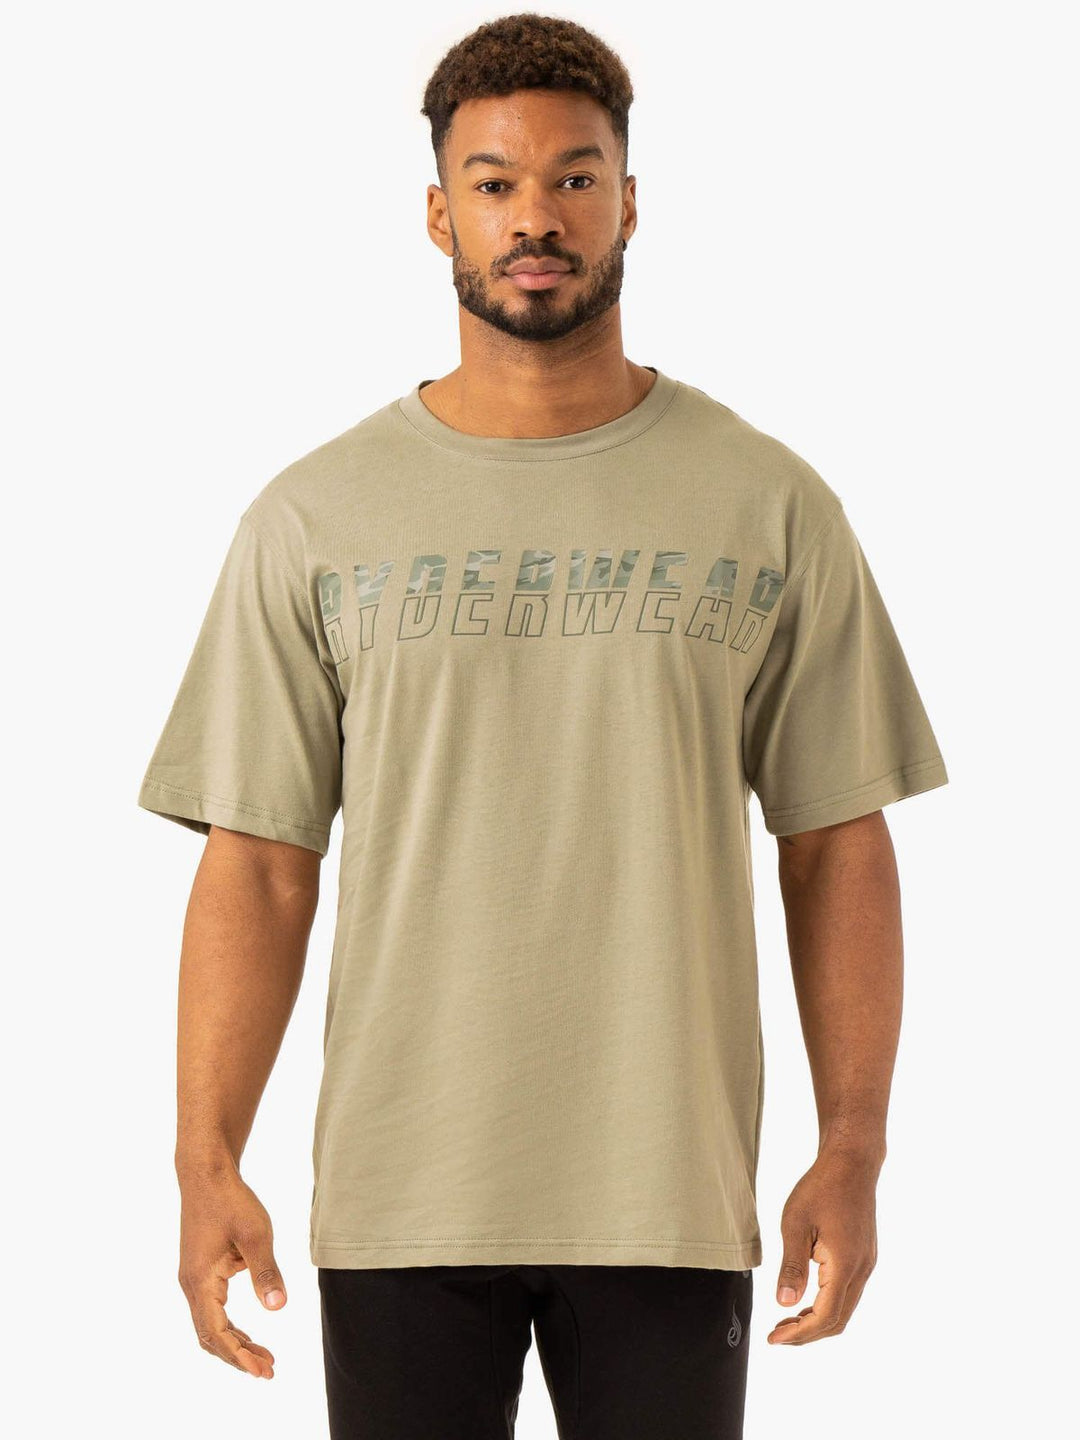 Overdrive Oversized T-Shirt - Sage Green Clothing Ryderwear 